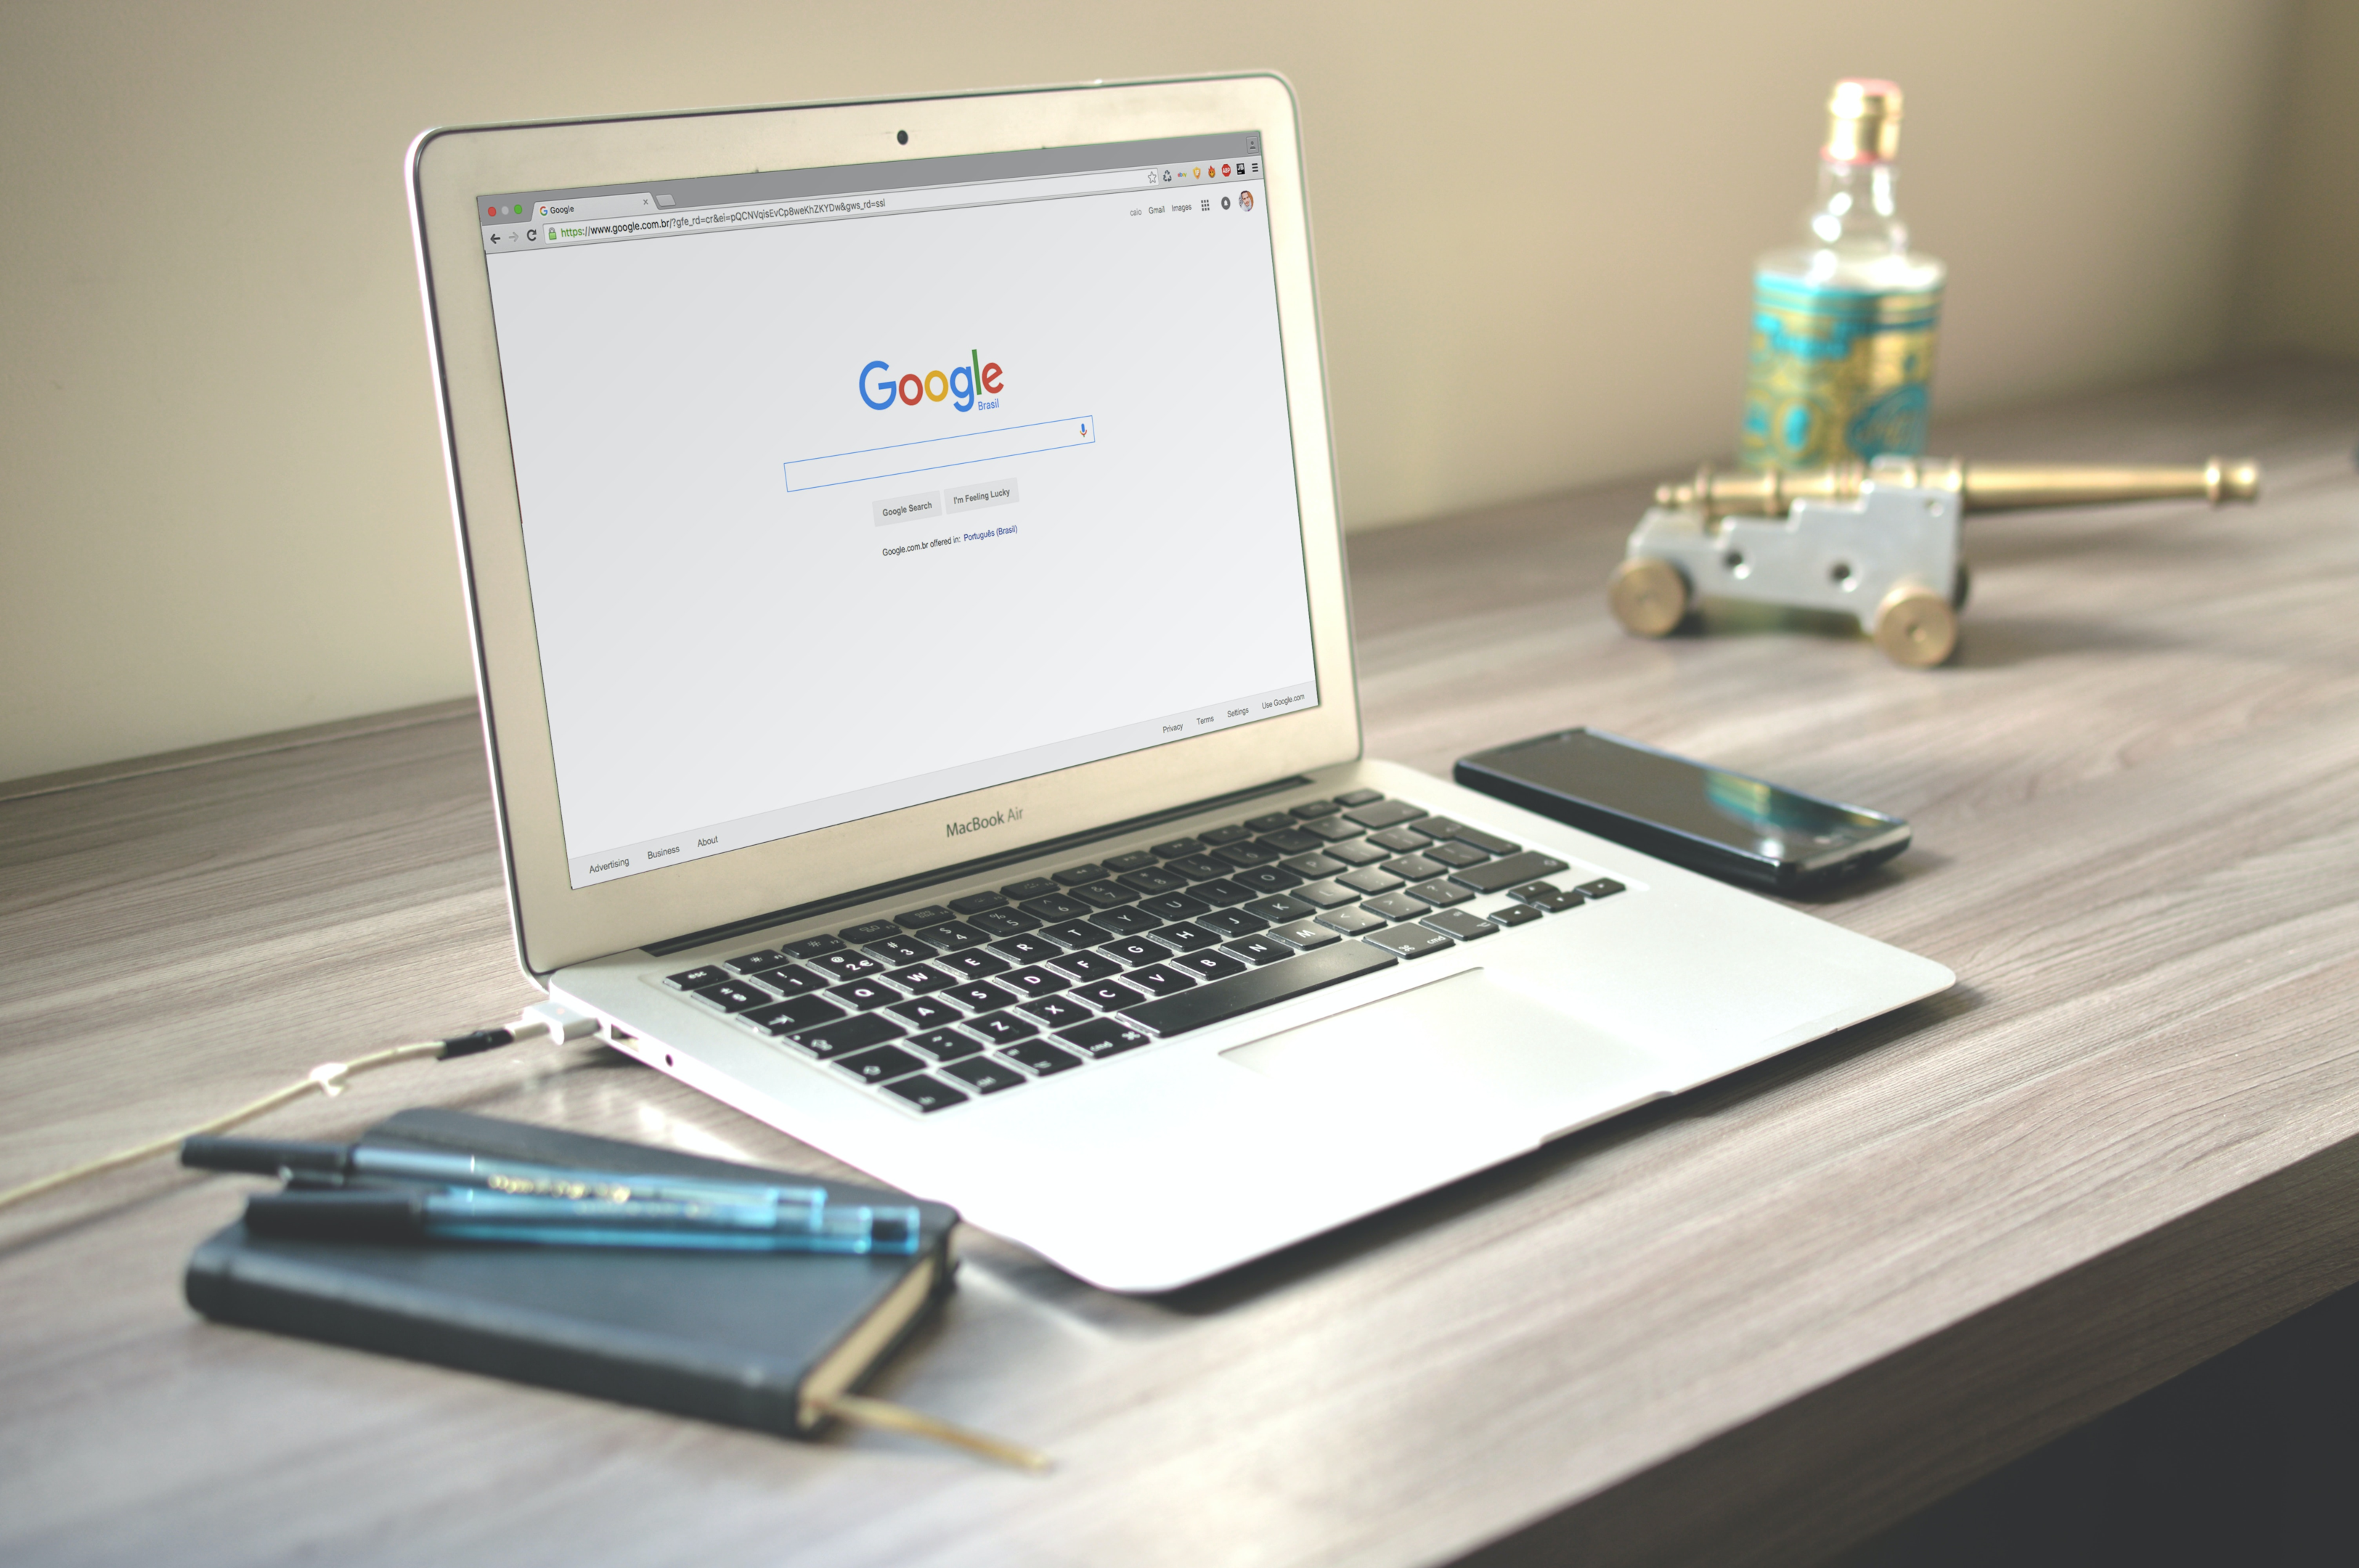 Digital search visibility is one of the popular marketing strategies nowadays | Photo by Caio from Pexels